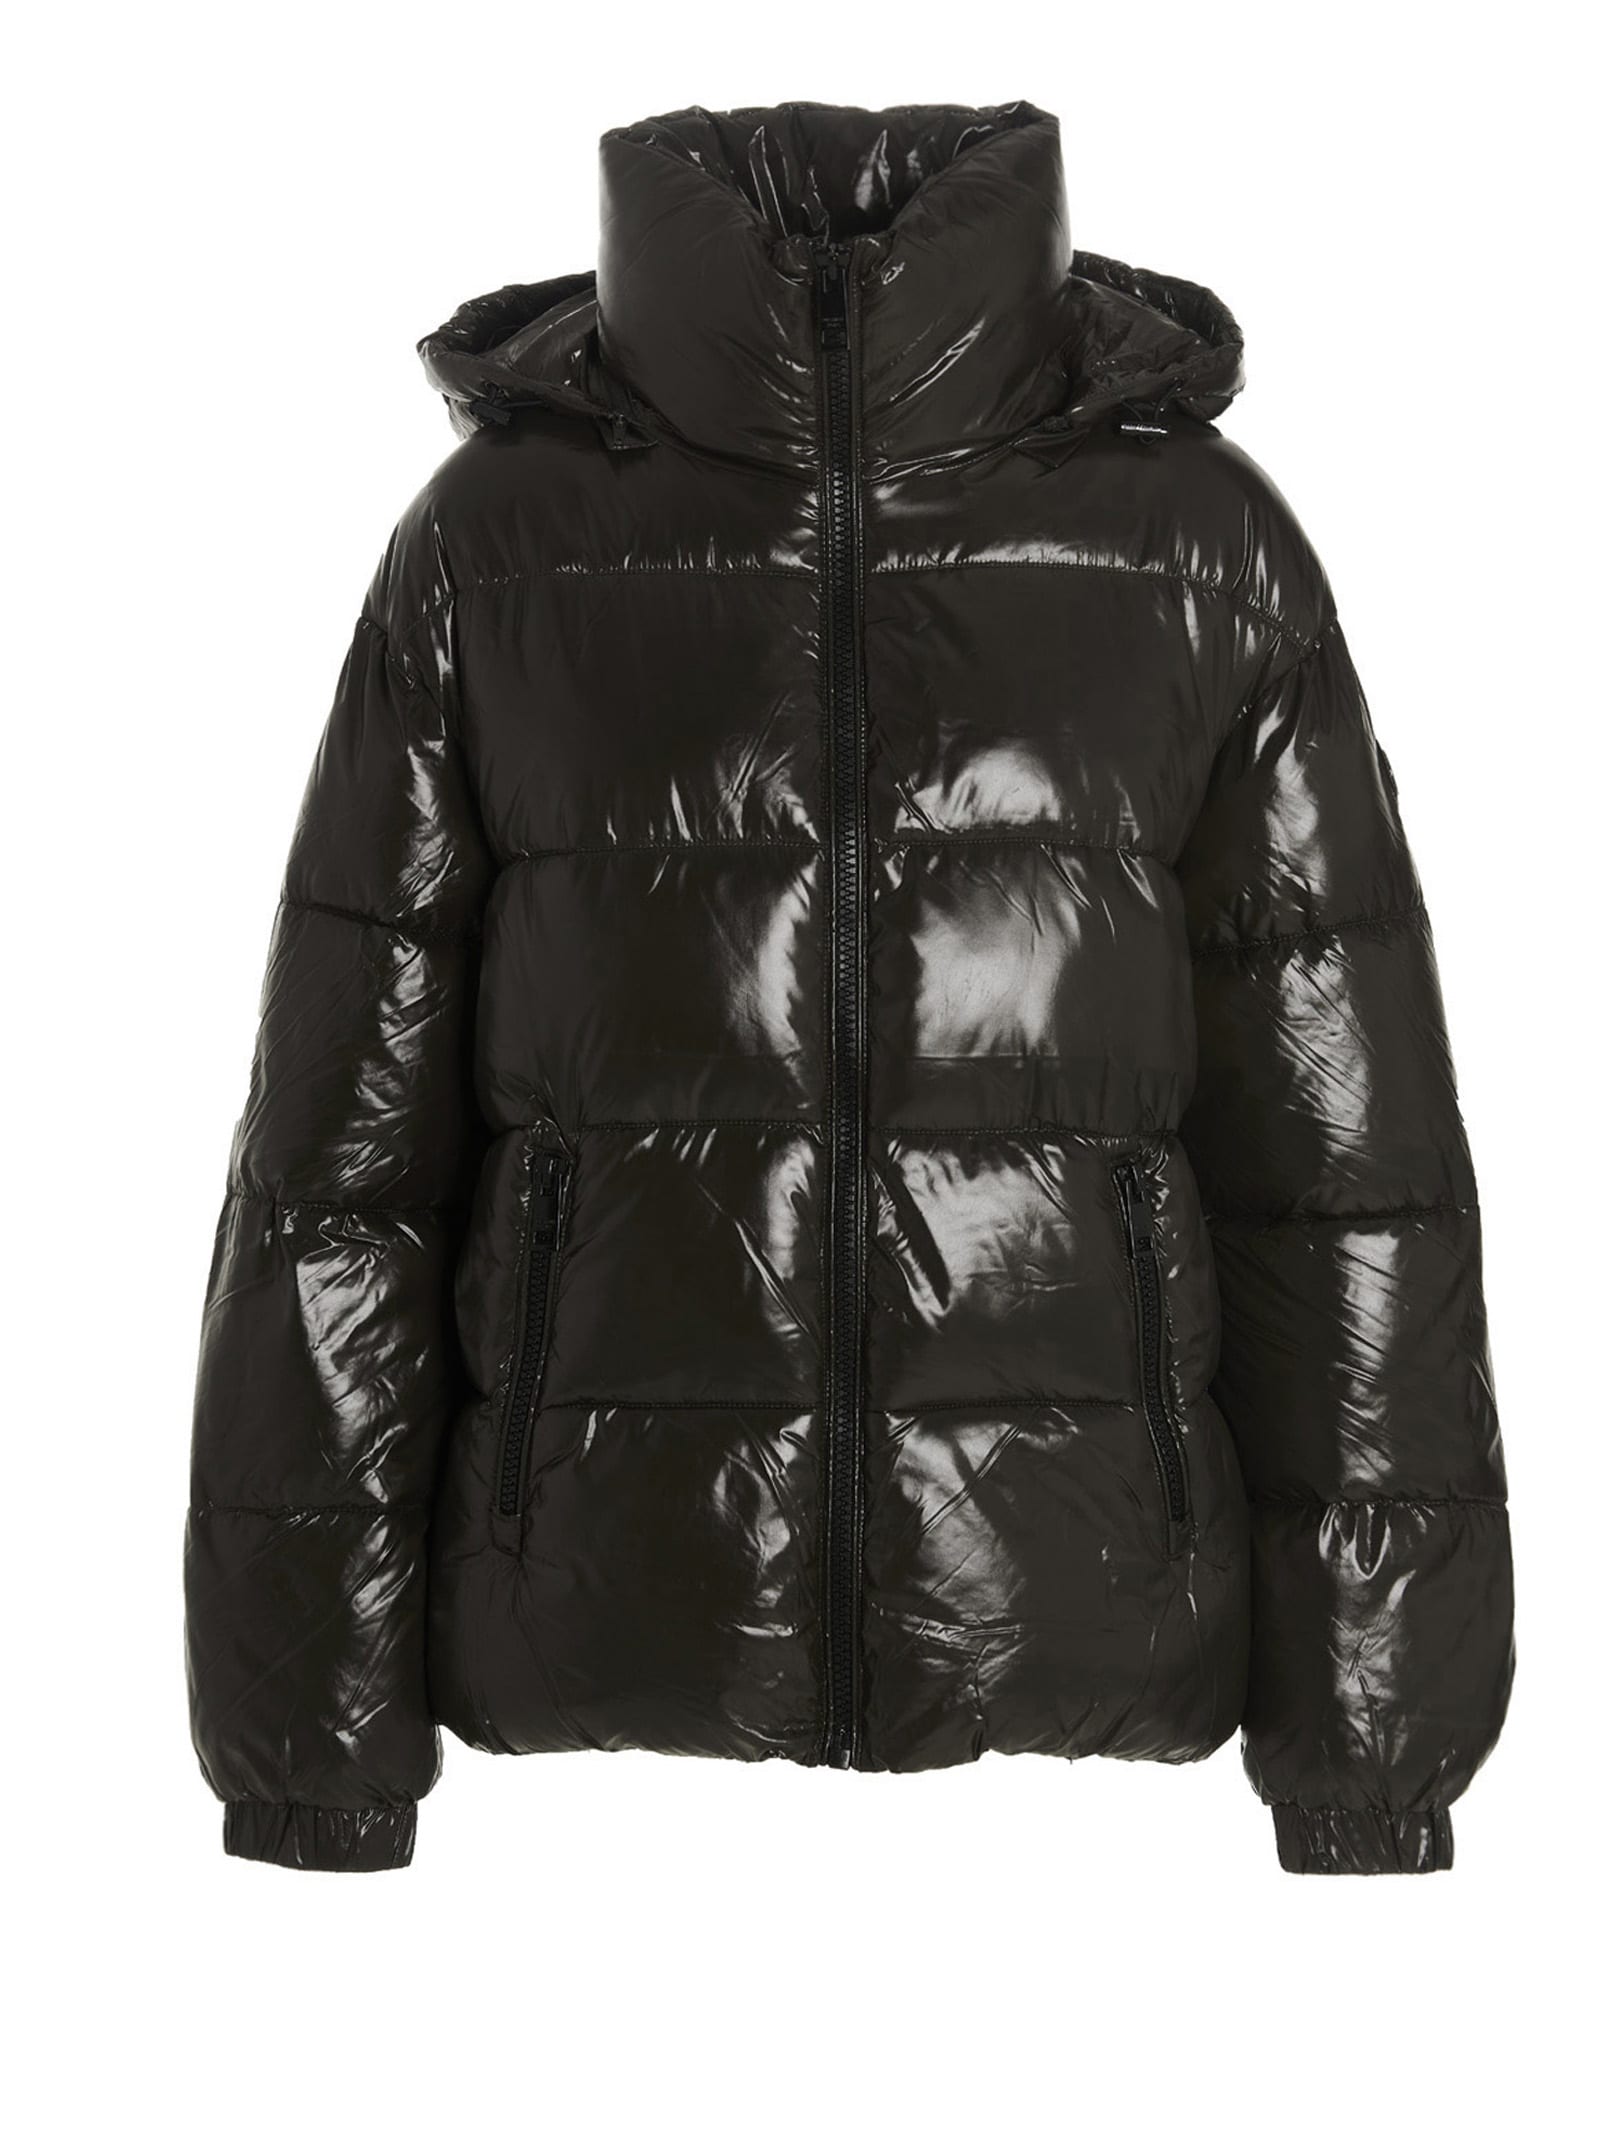 Michael Kors Hooded Cropped Puffer Jacket